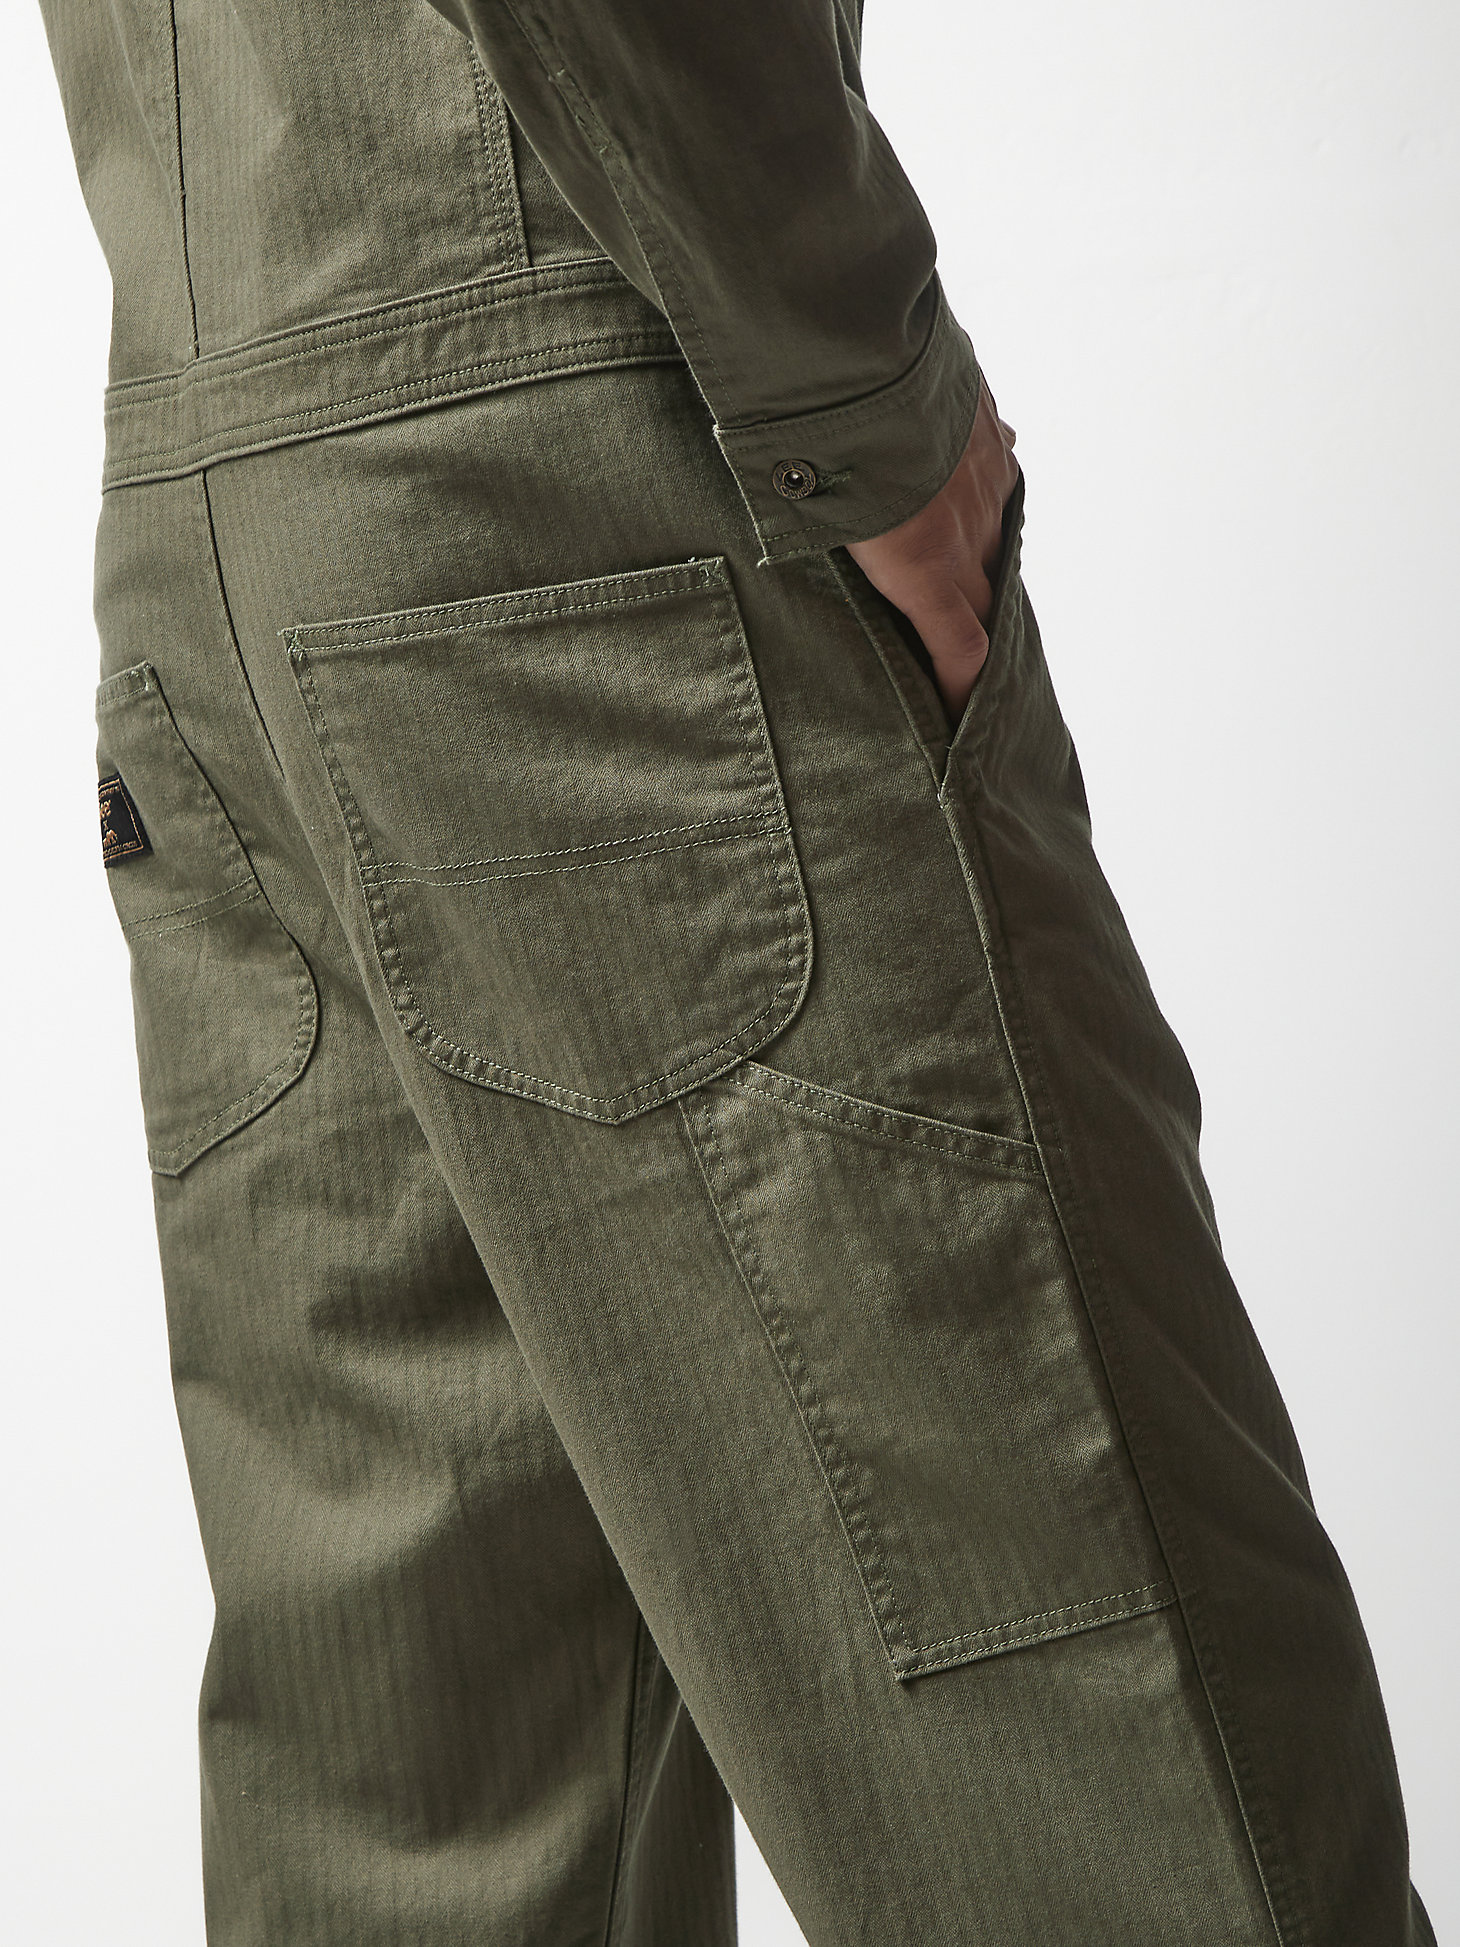 Lee® x The Brooklyn Circus® Unionall in Muted Olive alternative view 5